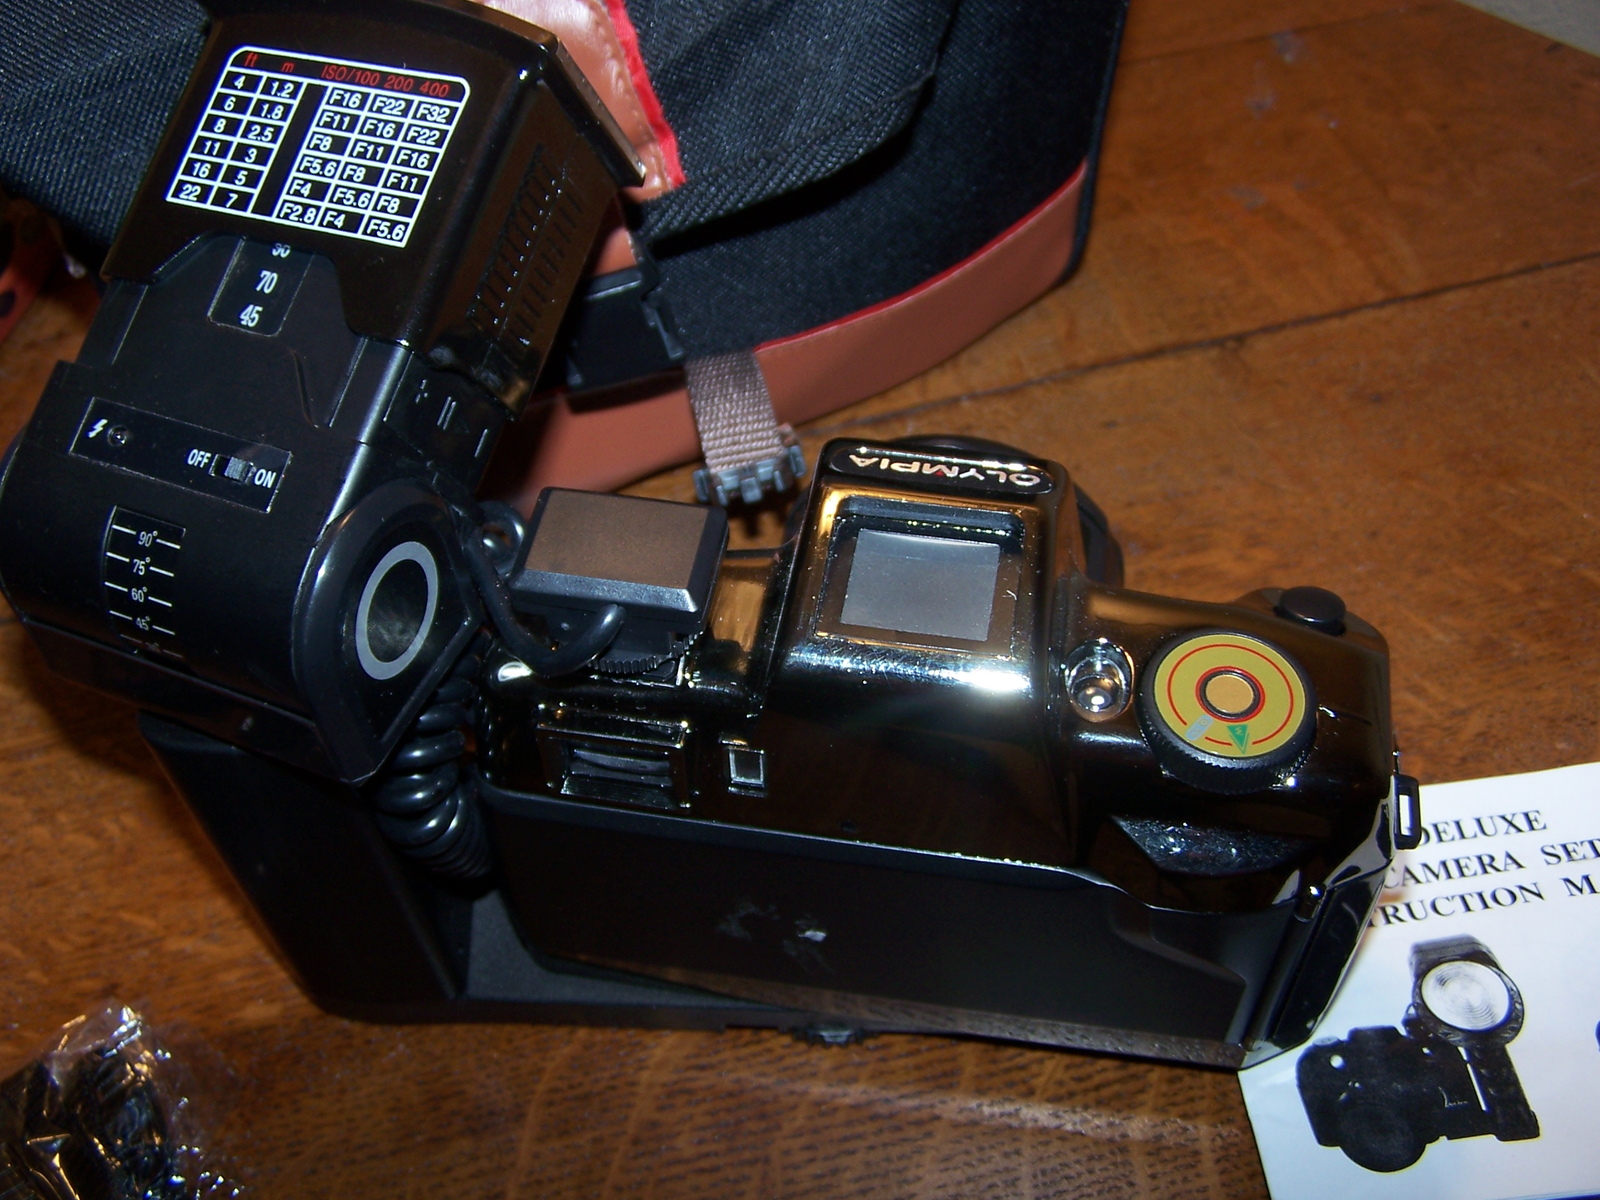 What is an Olympia DL2000 camera?